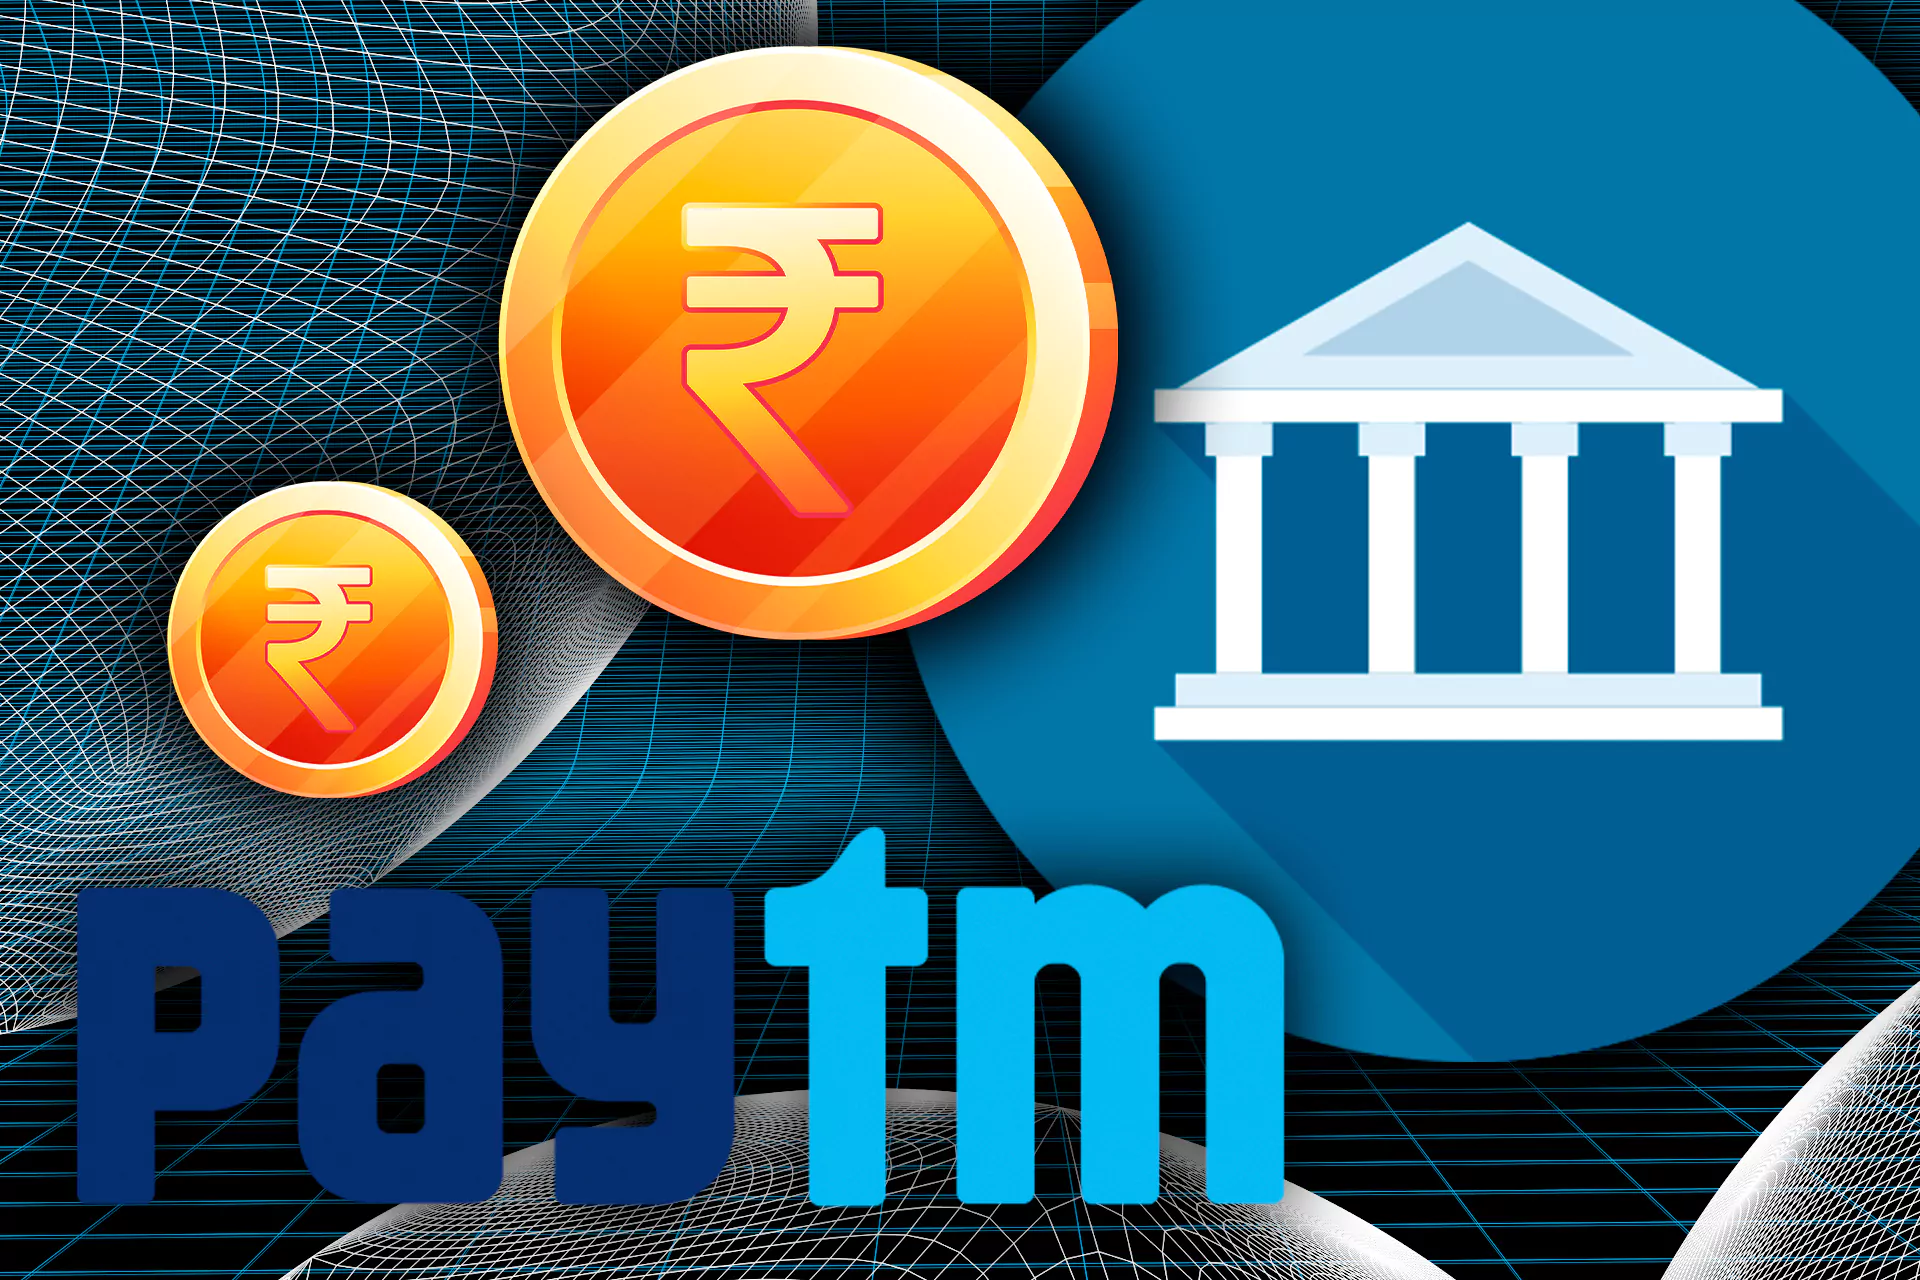 You can easily send money from your bank account to Paytm.